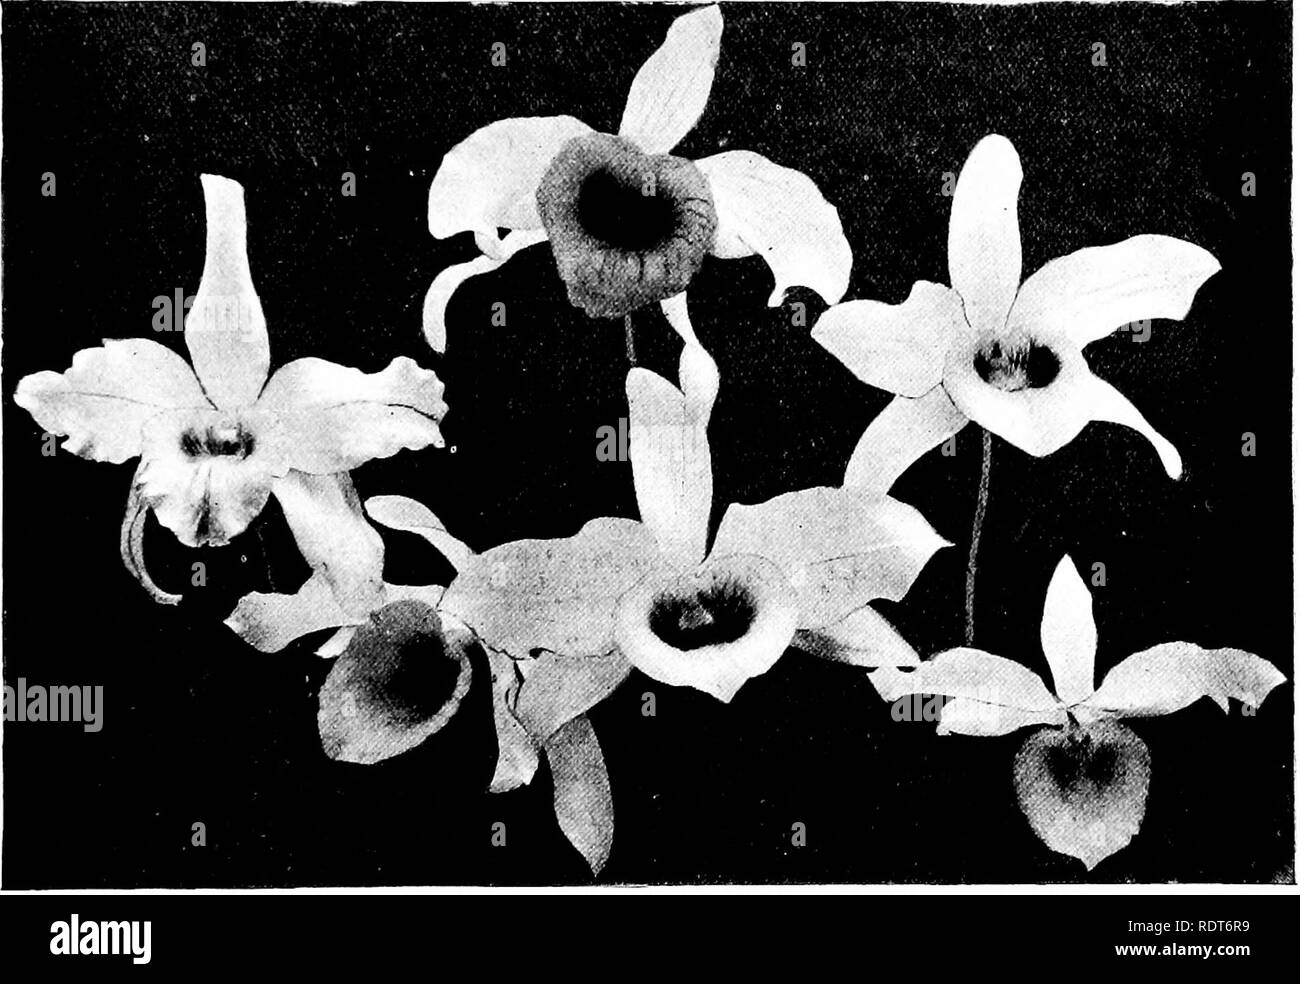 . The orchid stud-book: an enumeration of hybrid orchids of artificial origin, with their parents, raisers, date of first flowering, references to descriptions and figures, and synonymy. With an historical introduction and 120 figures and a chapter on hybridising and raising orchids from seed. Orchids. Part II.] THE ORCHID STUD-BOOK. 75 80,93; 1901, 170; G.C. 1897, i. 115; J.H. 1900, i. 239, f. 64.—Chamberlain, 1897. 15. D. x Cassiope (moniliforme J x nobile), G.C. 1890, ii. 620 ; Orchidoph. 1S93, 105, 106, f. ; O.K. 1893, 293; 1895, 126, 131 ; Reichenb. ser. 2, 5, t. 50, f. 2 ; Diet. Ic. O. D Stock Photo